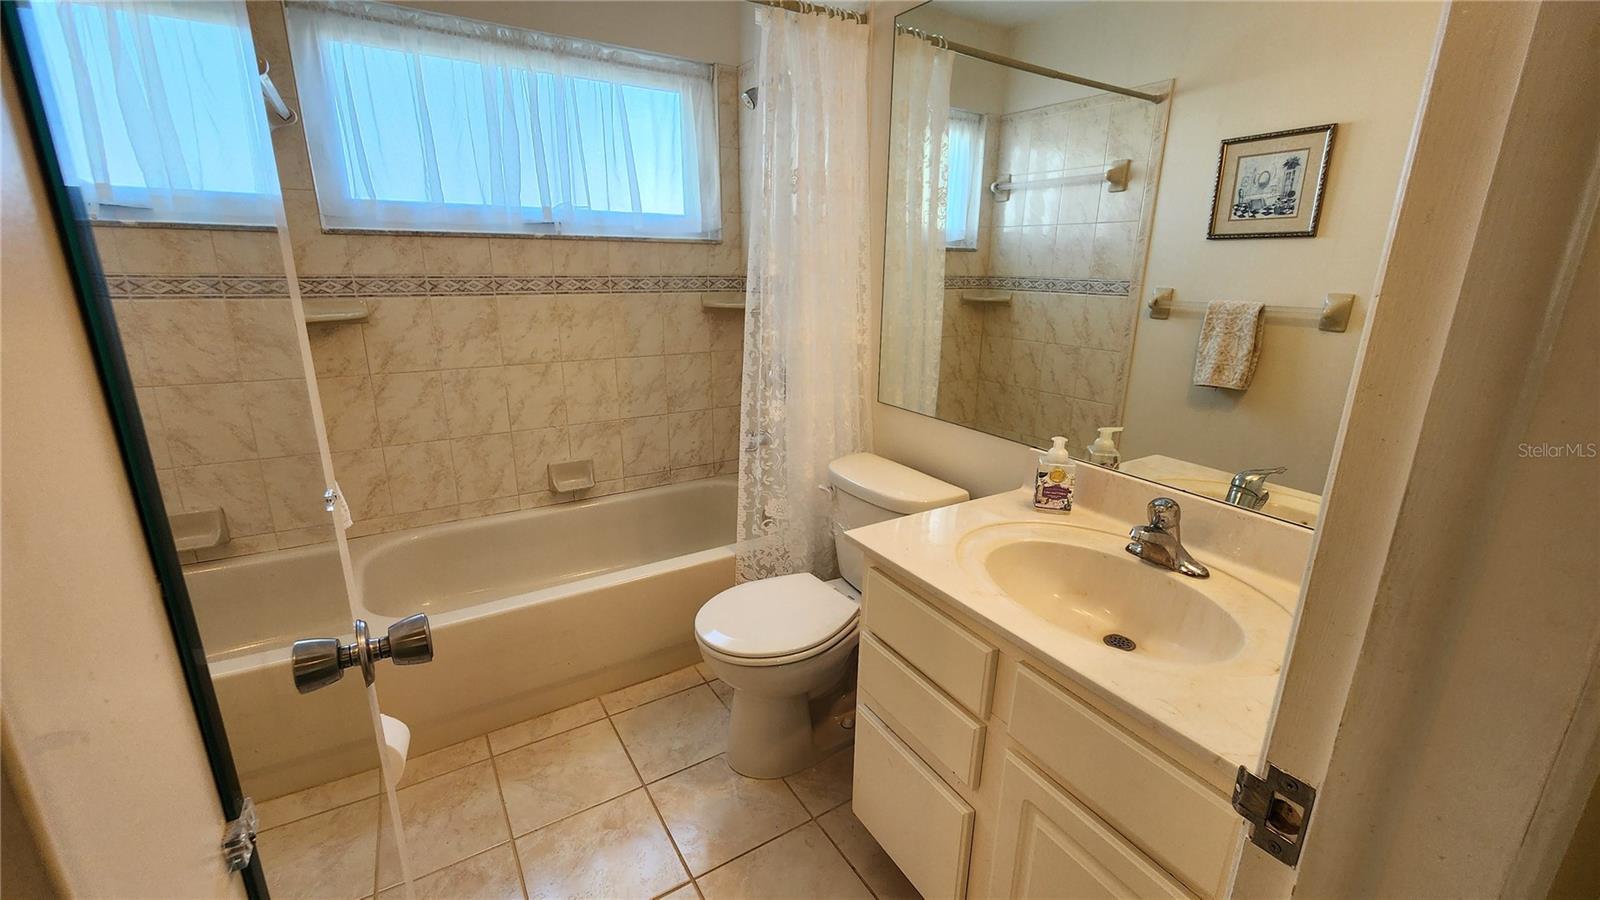 Full bathroom with shower/tub combo.